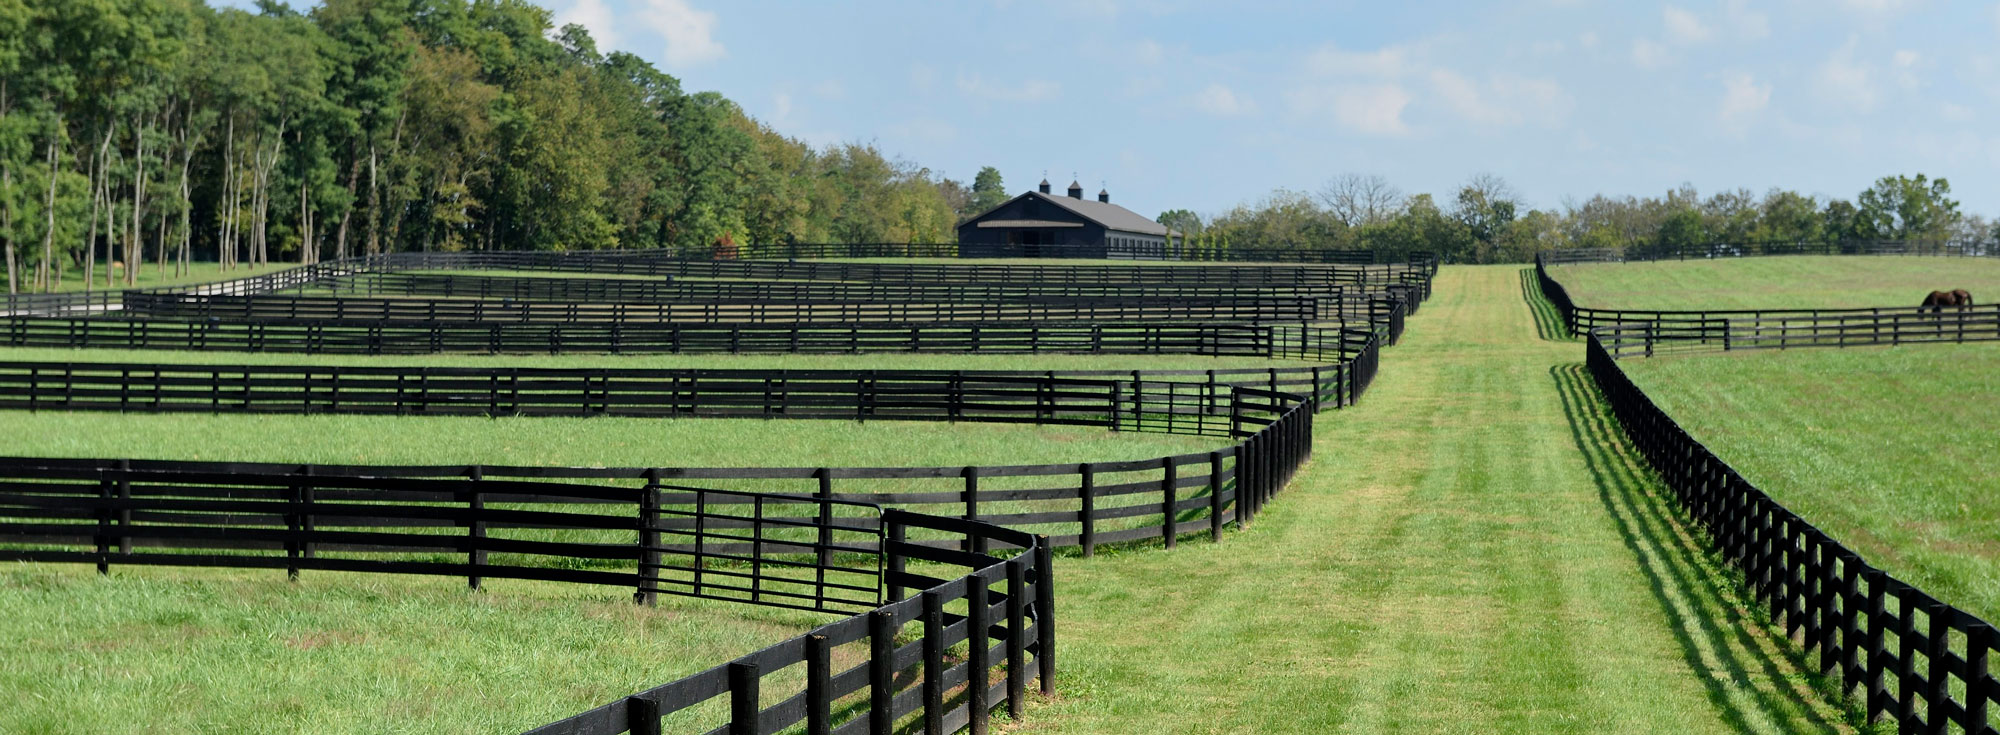  A long shot of a horse farm with a large black barn in the middle and several fenced paddocks with green grass.